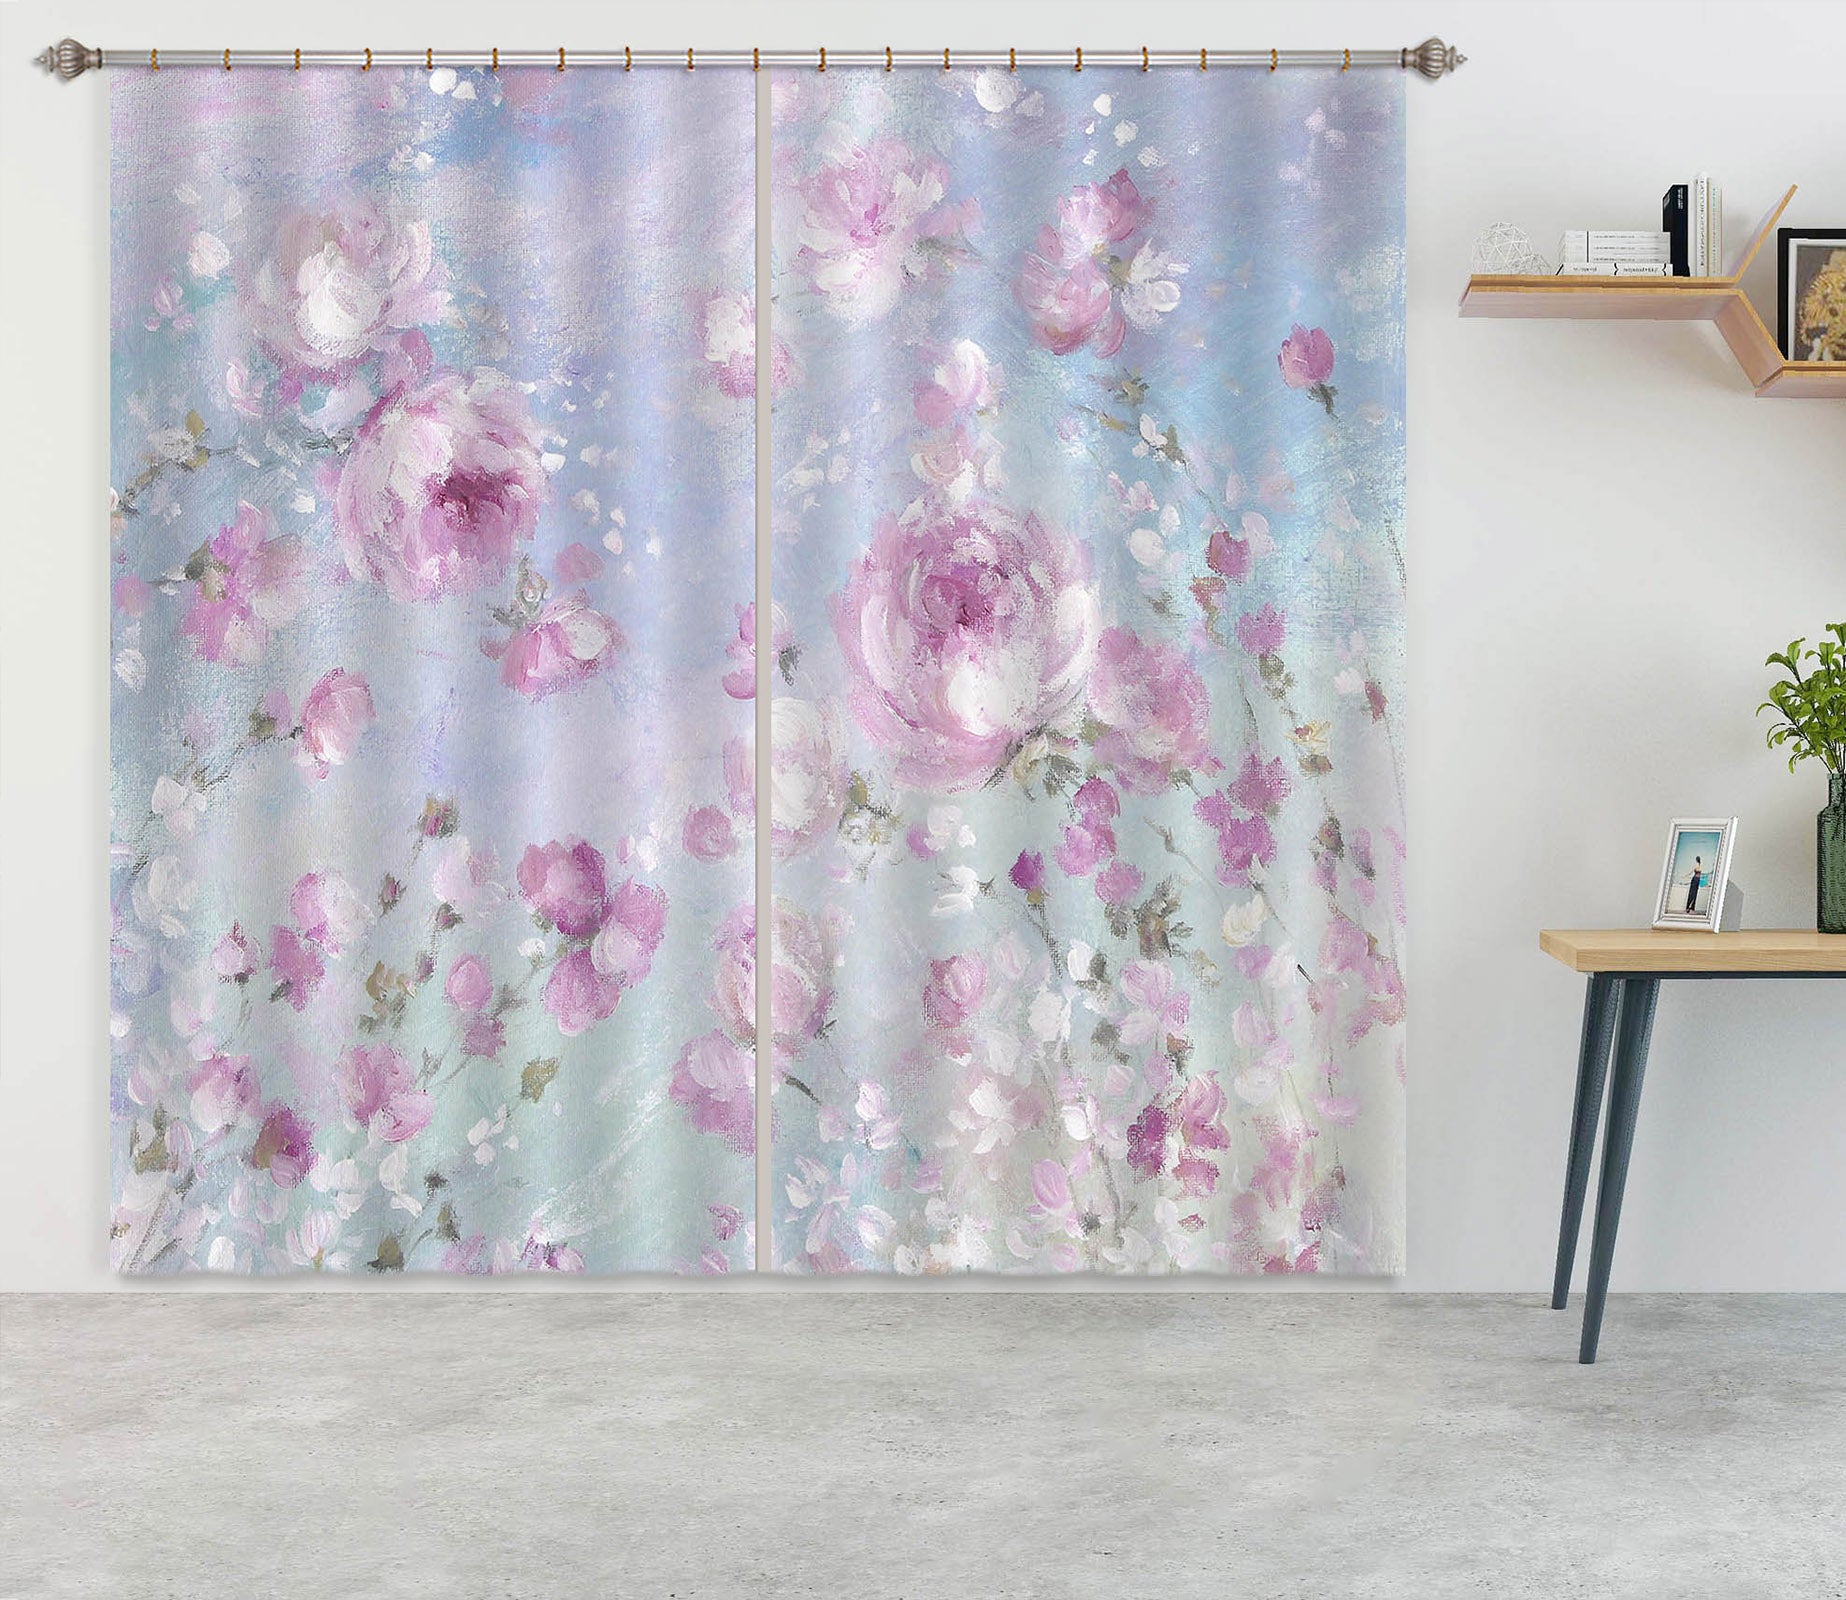 3D Blooming Roses 1002 Debi Coules Curtain Curtains Drapes